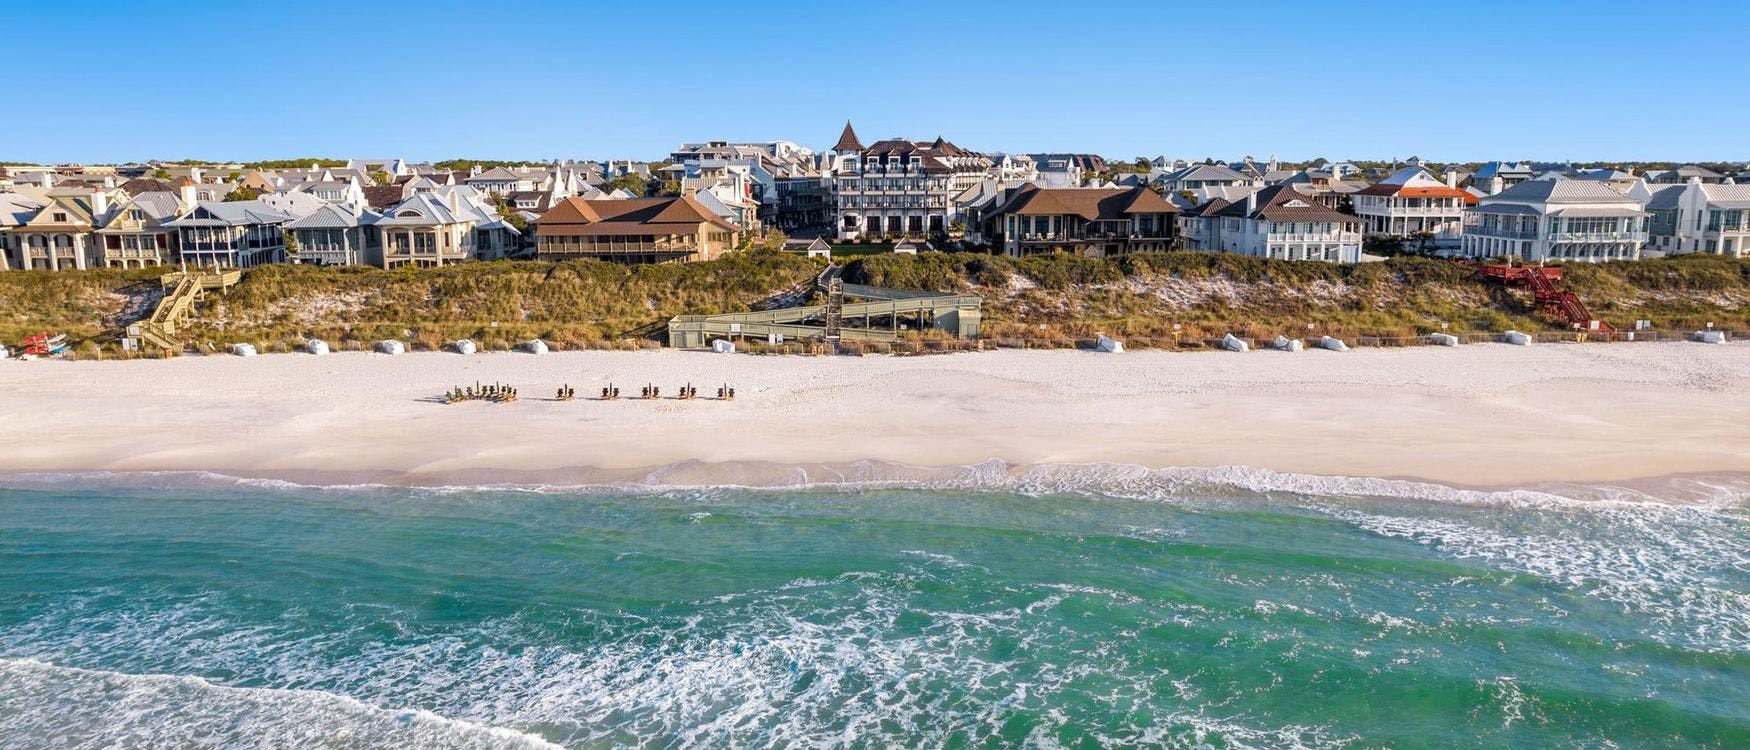 Aerial View of Rosemary Beach 30A Florida 